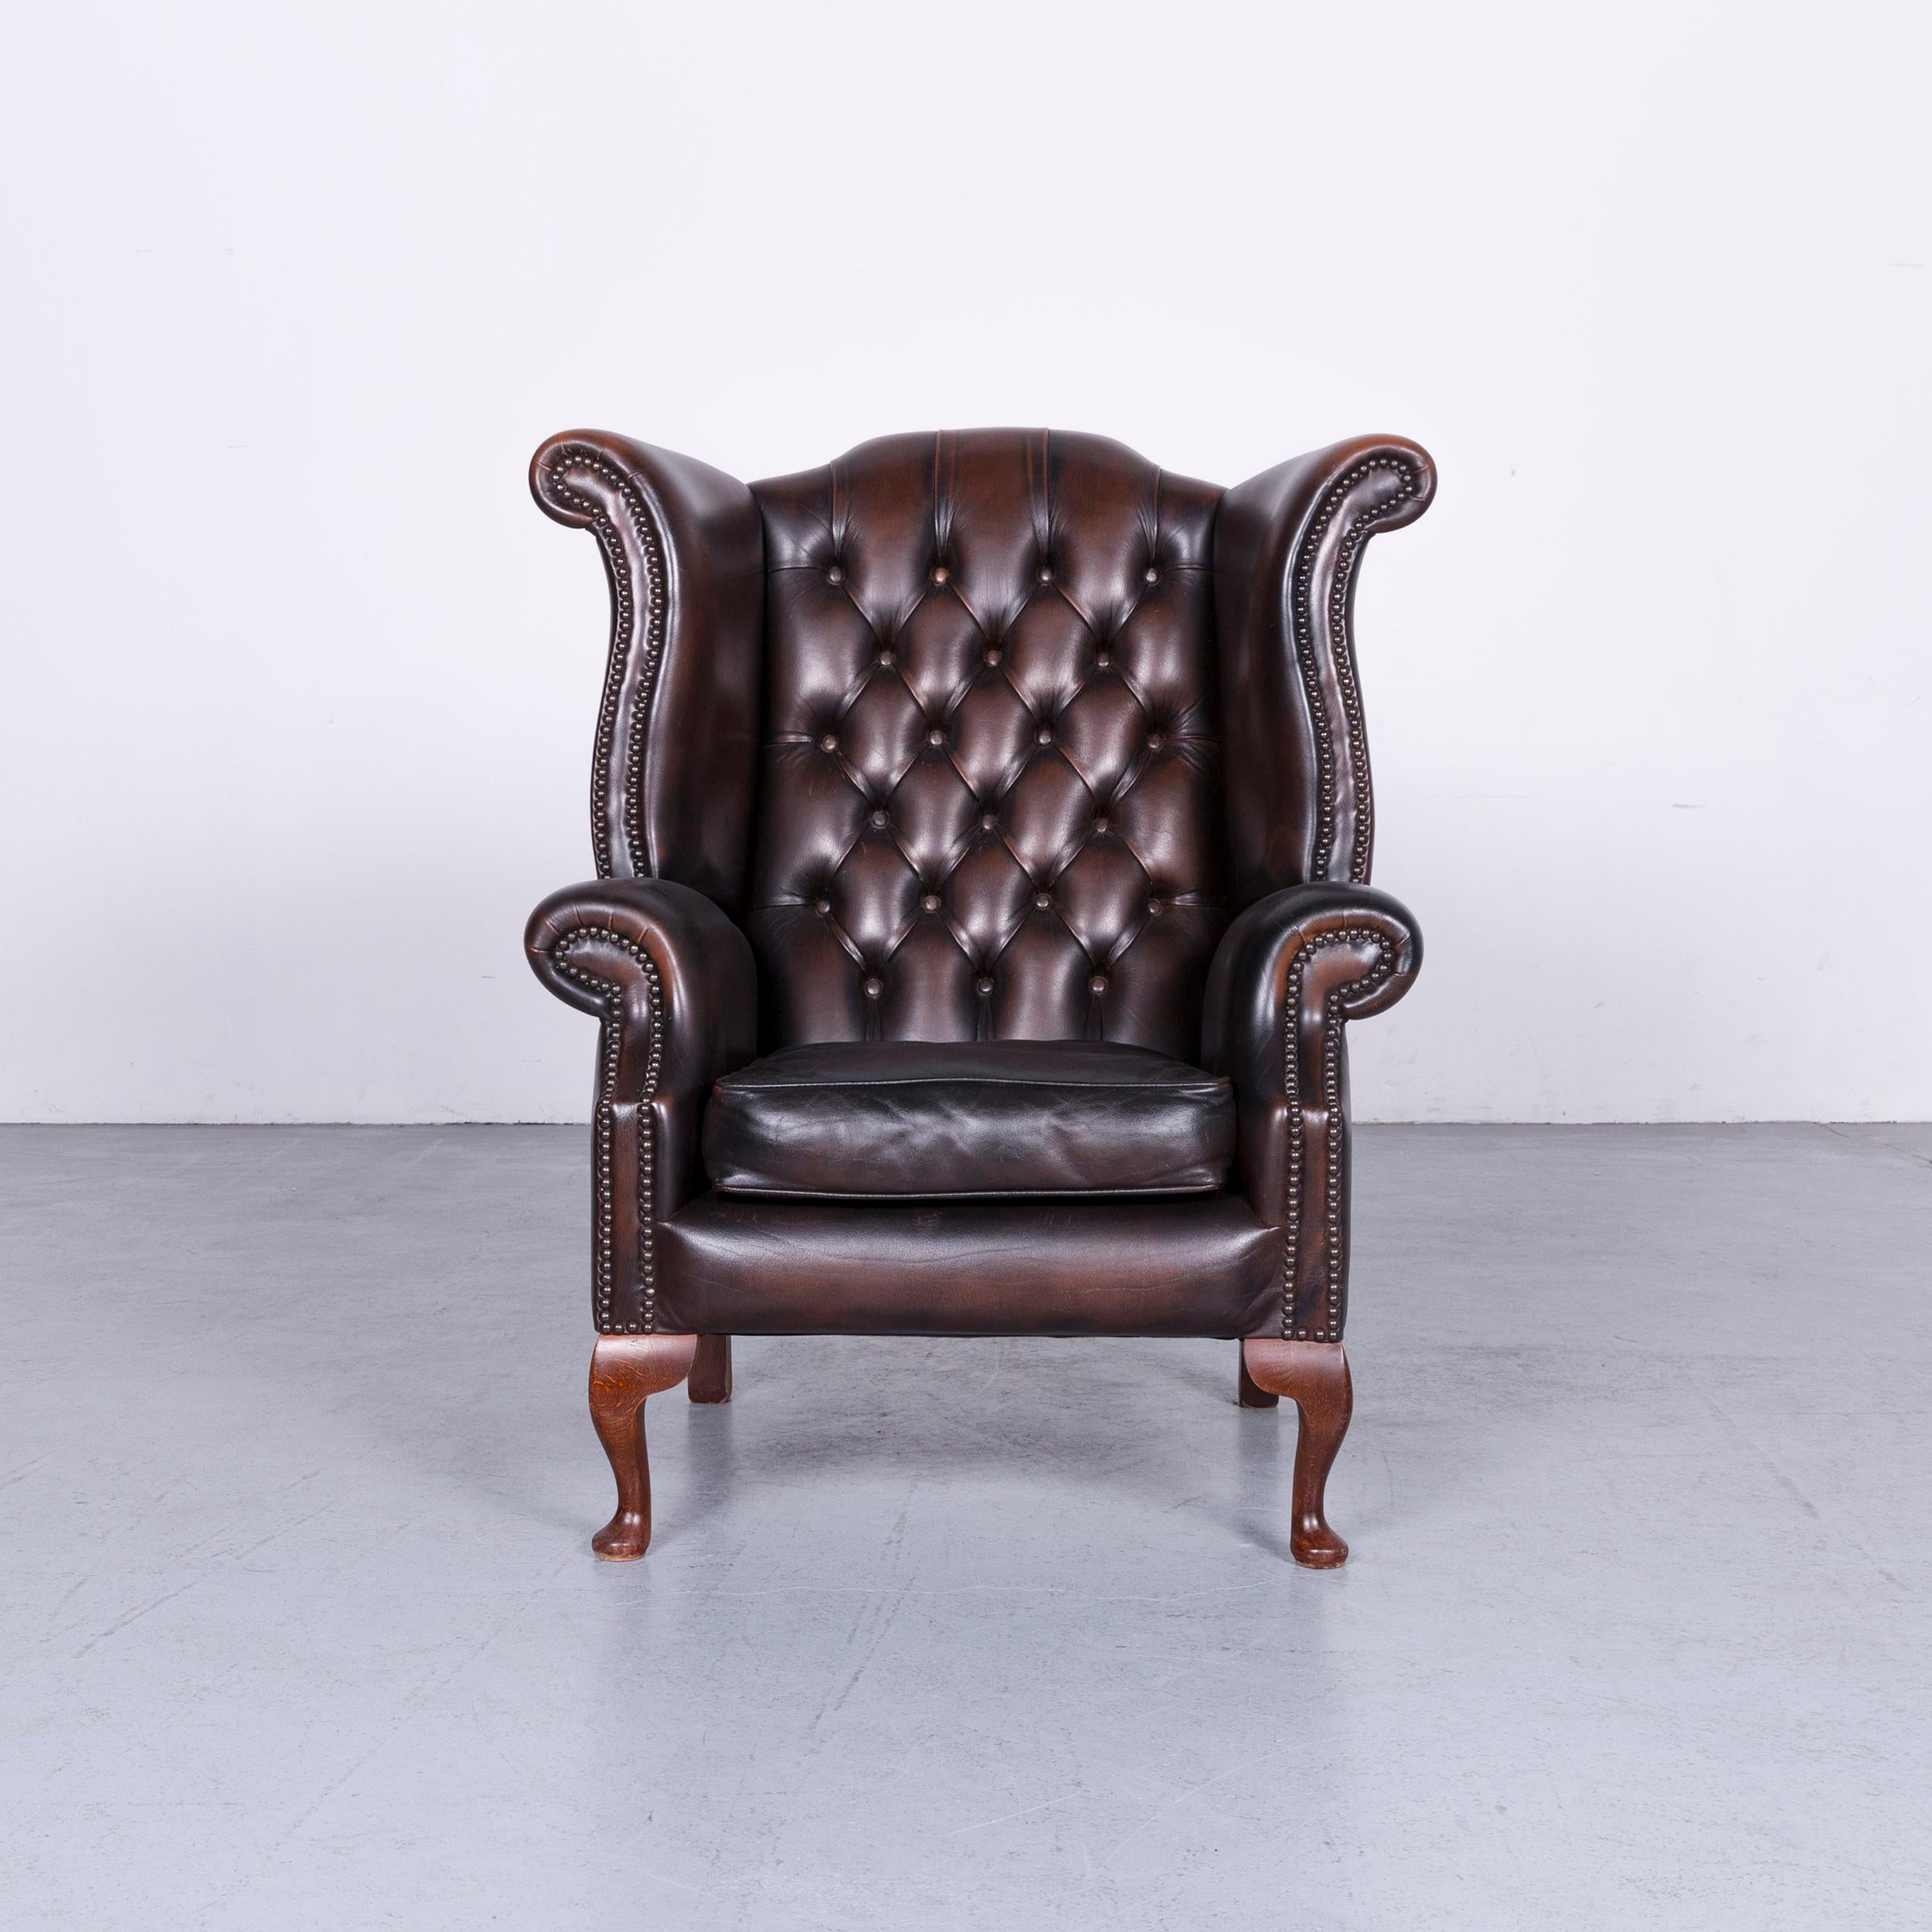 We bring to you a vintage brown Chesterfield leather armchair buttoned clubchair.